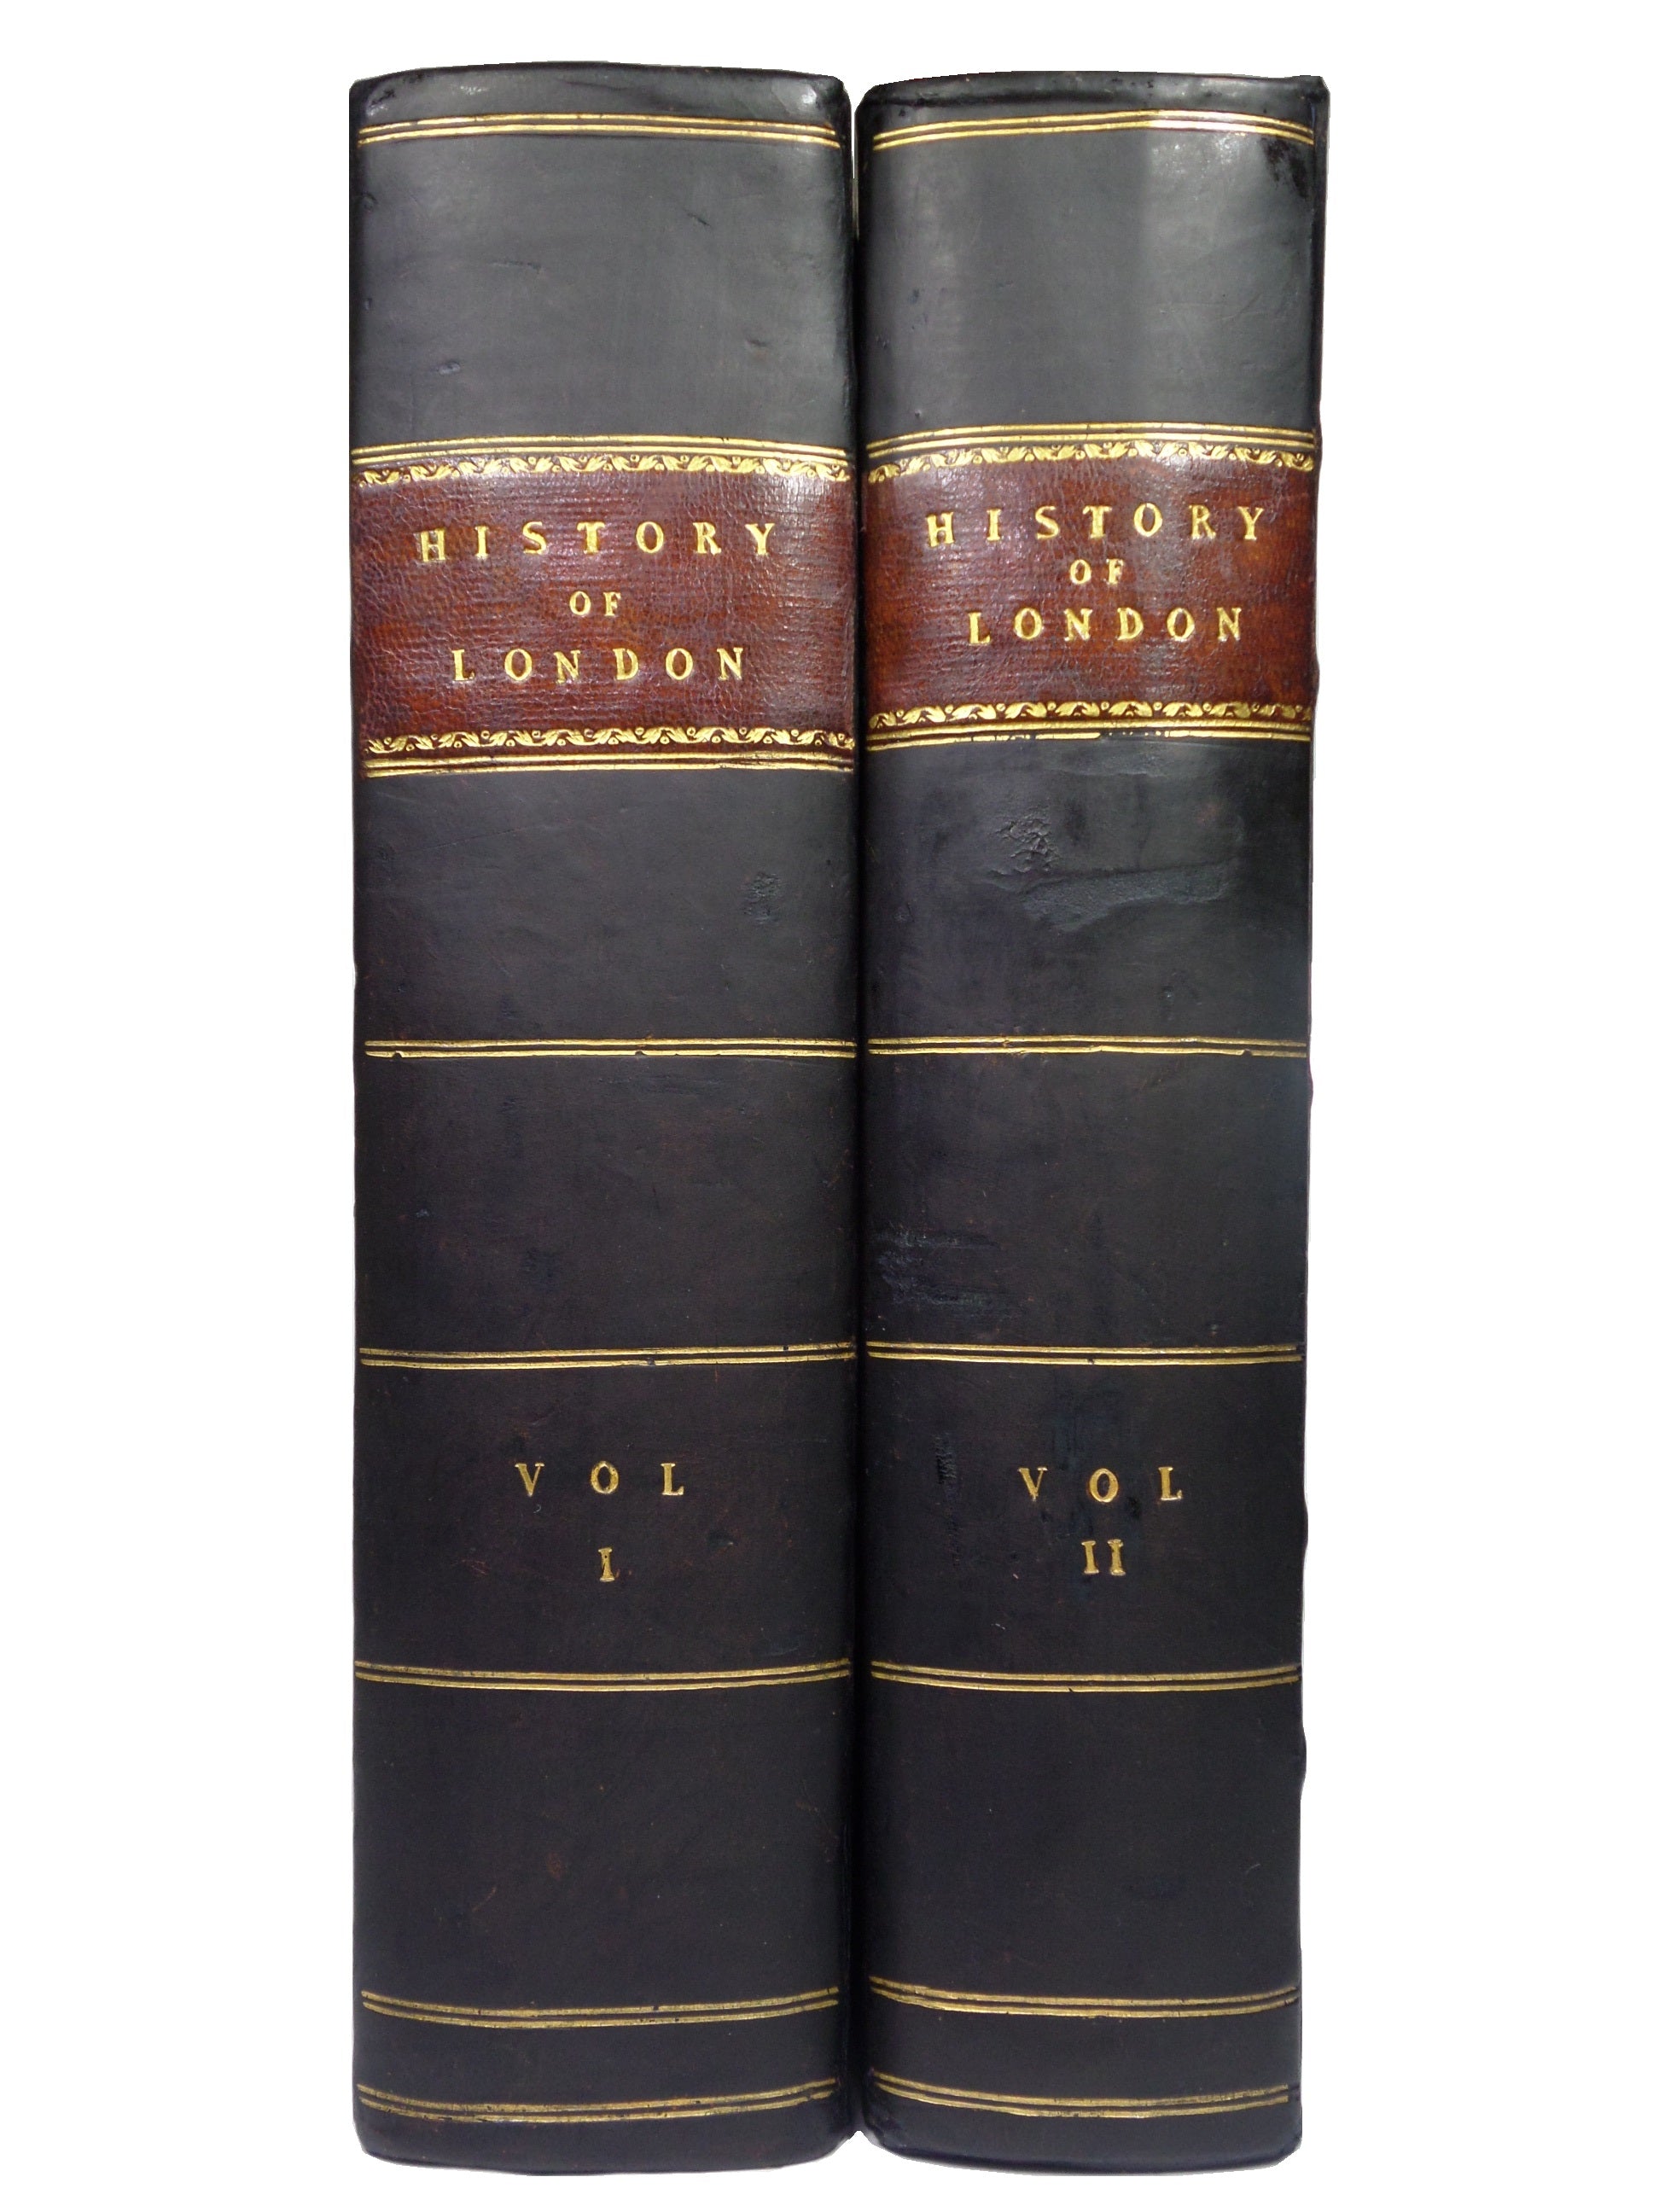 THE HISTORY OF LONDON AND ITS ENVIRONS 1811 HENRY HUNTER 2 VOLS. LEATHER-BOUND